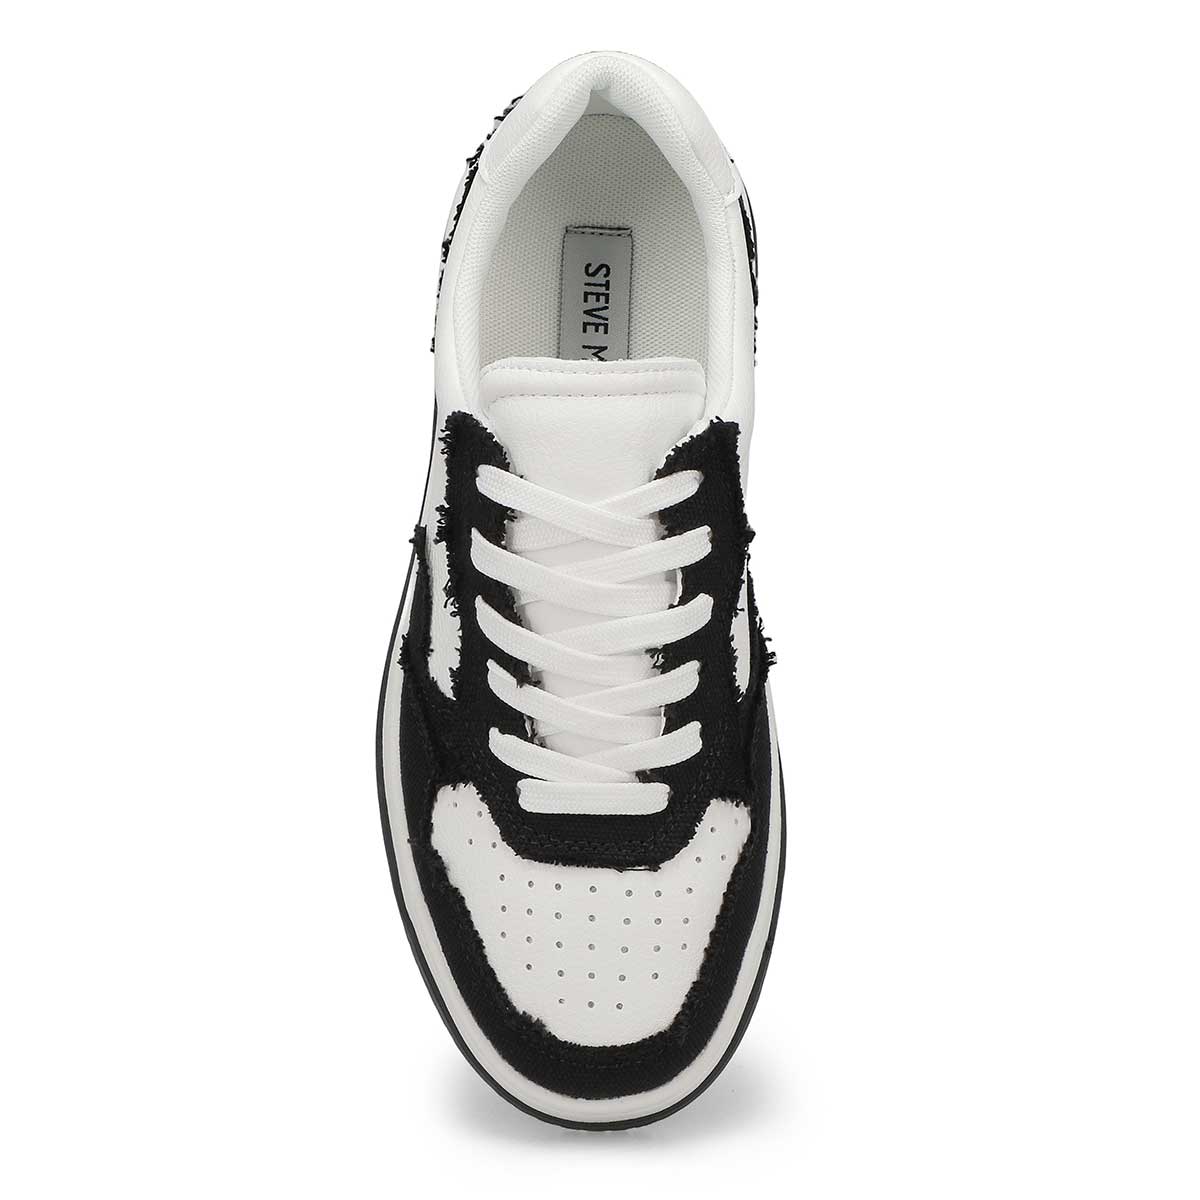 Womens Brynlee Lace Up Sneaker - White/Black